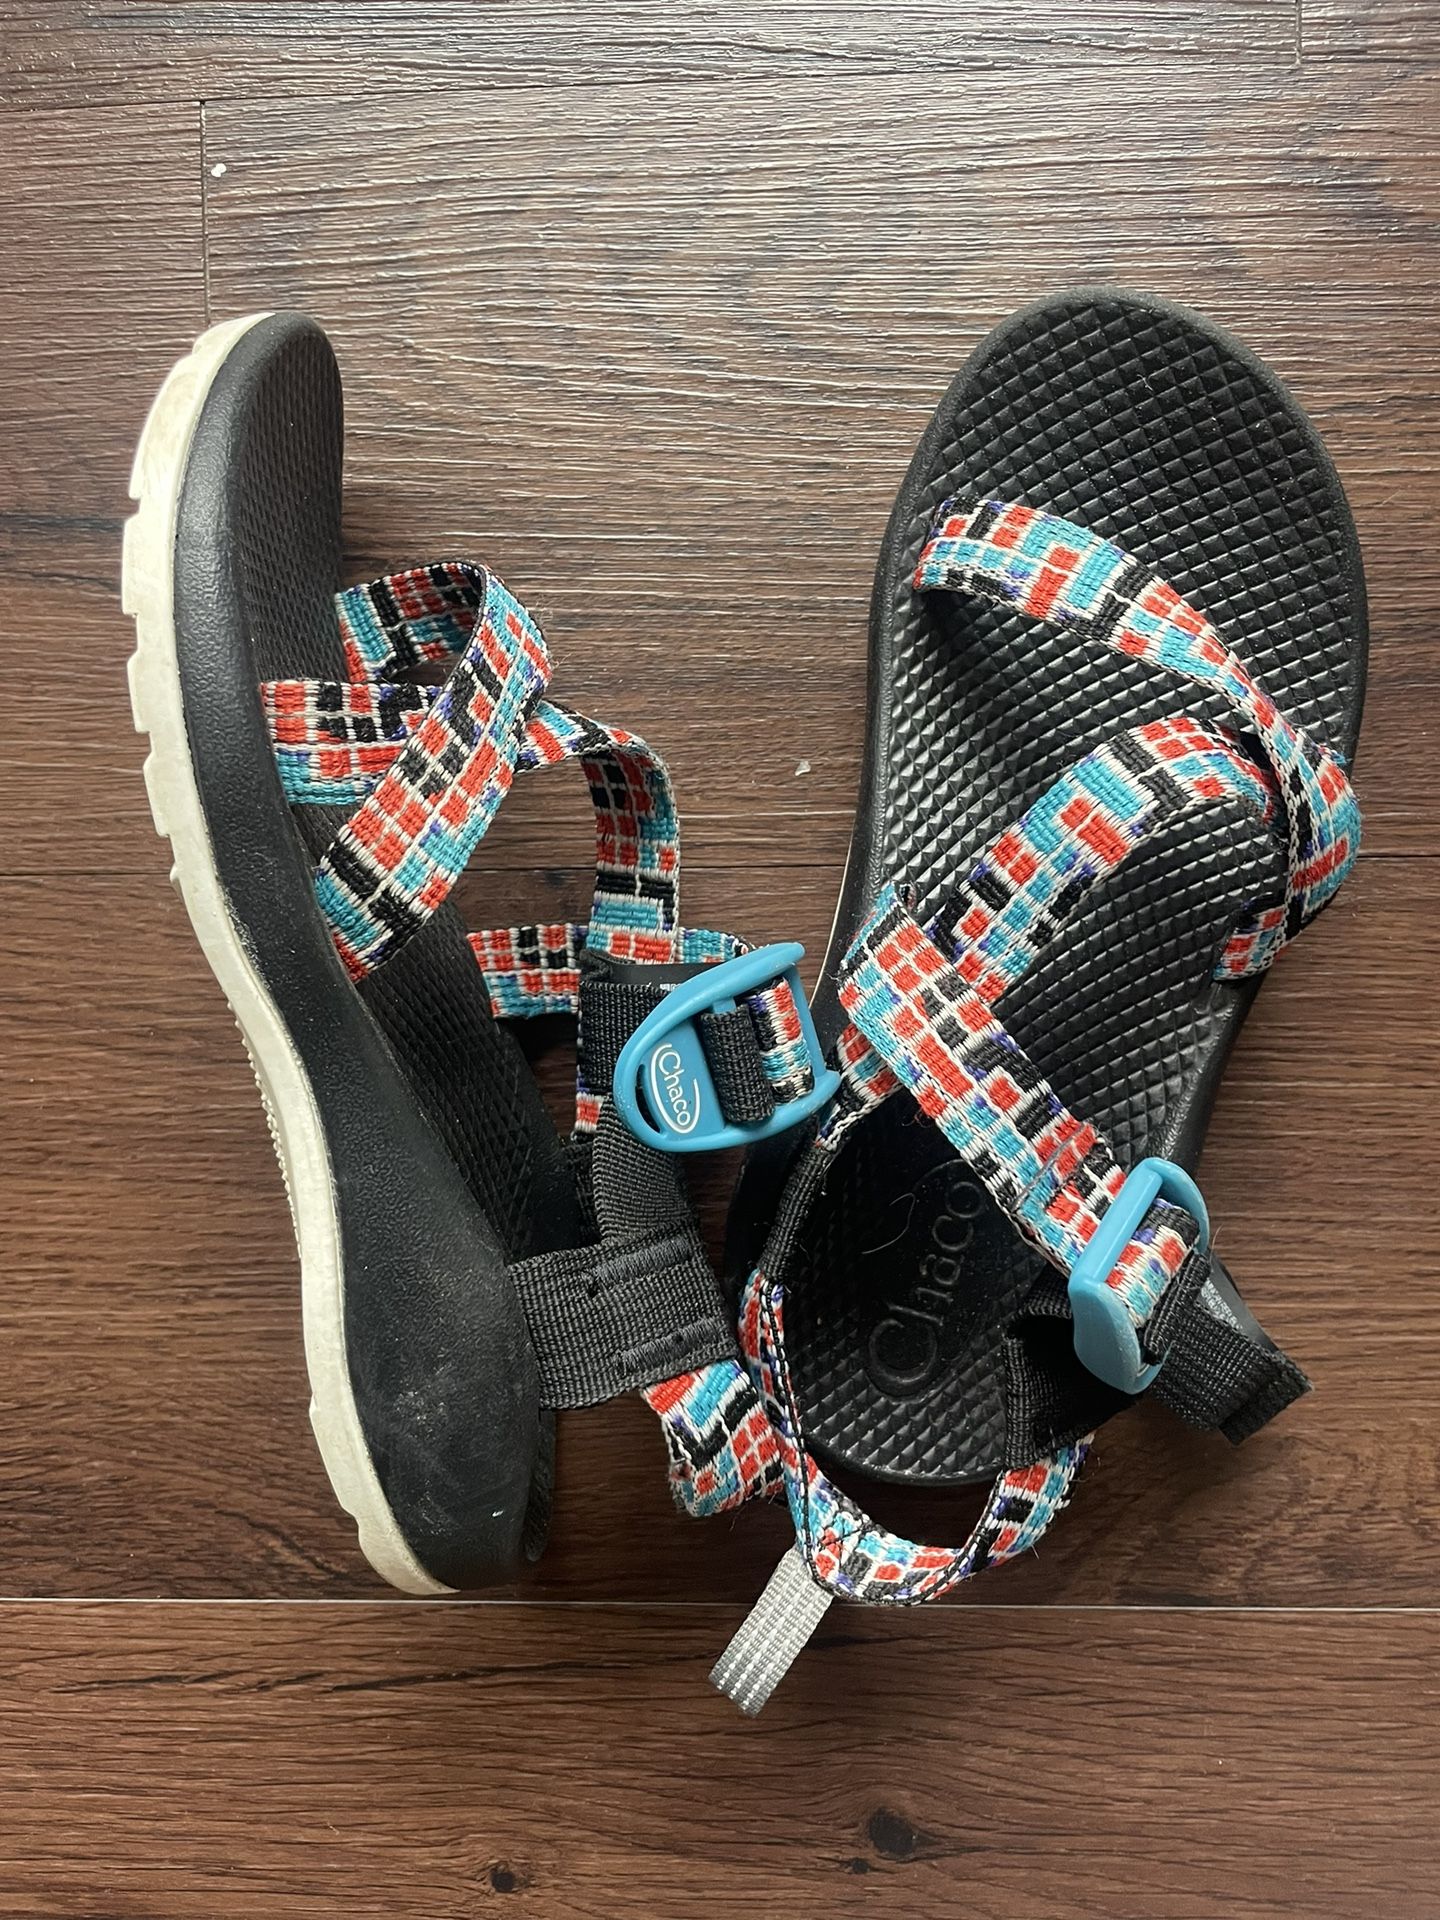 Girls Sandals Chaco, Size 2